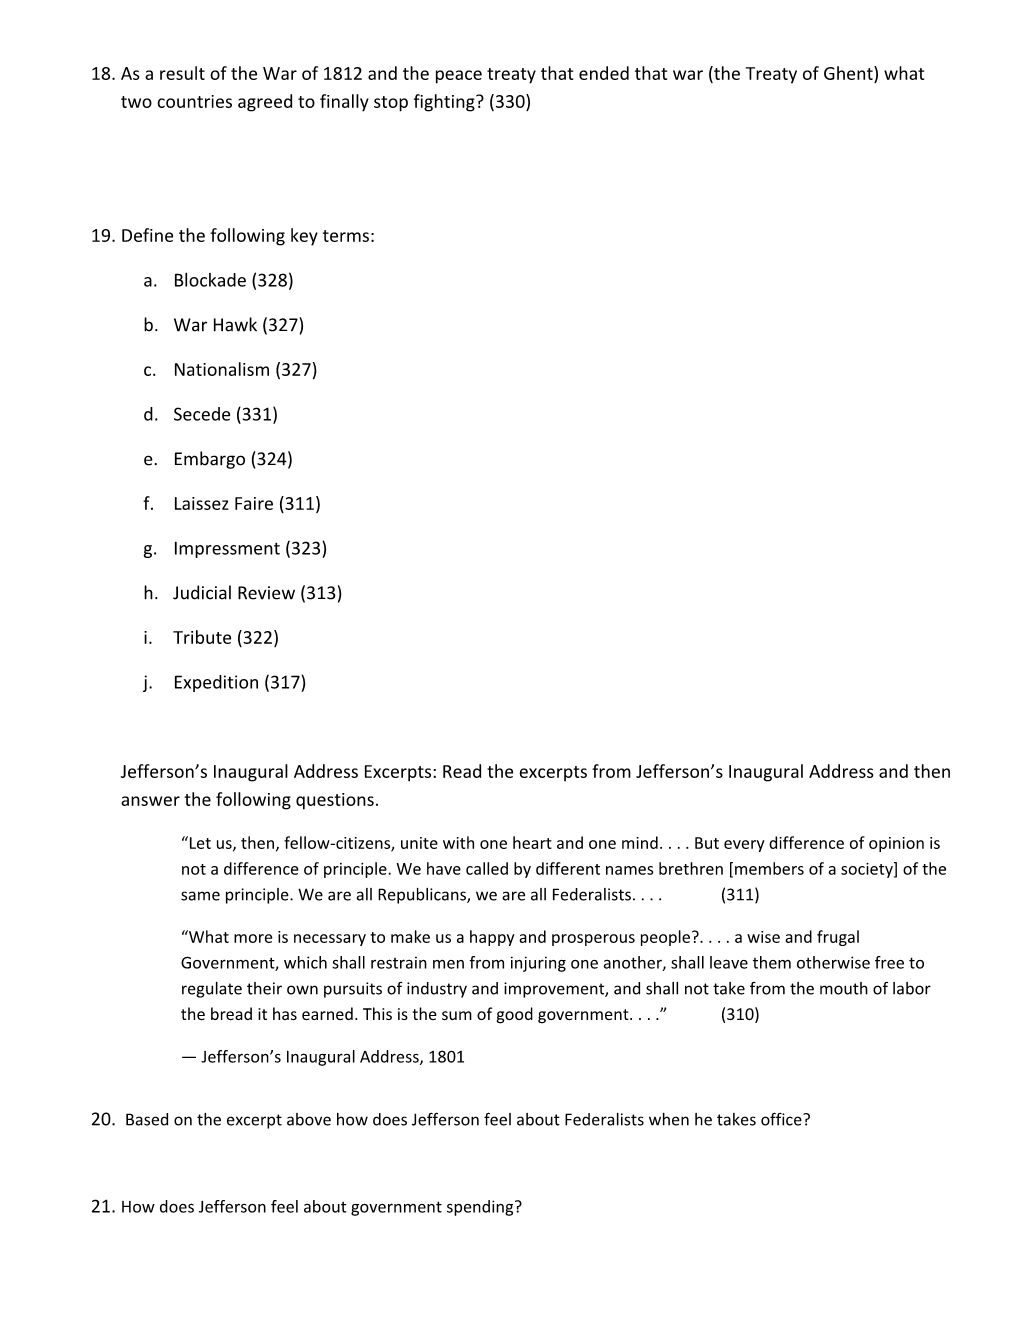 Chapter 9 Exam Study Guide Directions: Complete The Following Questions On The Study Guide To The Best Of Your Ability